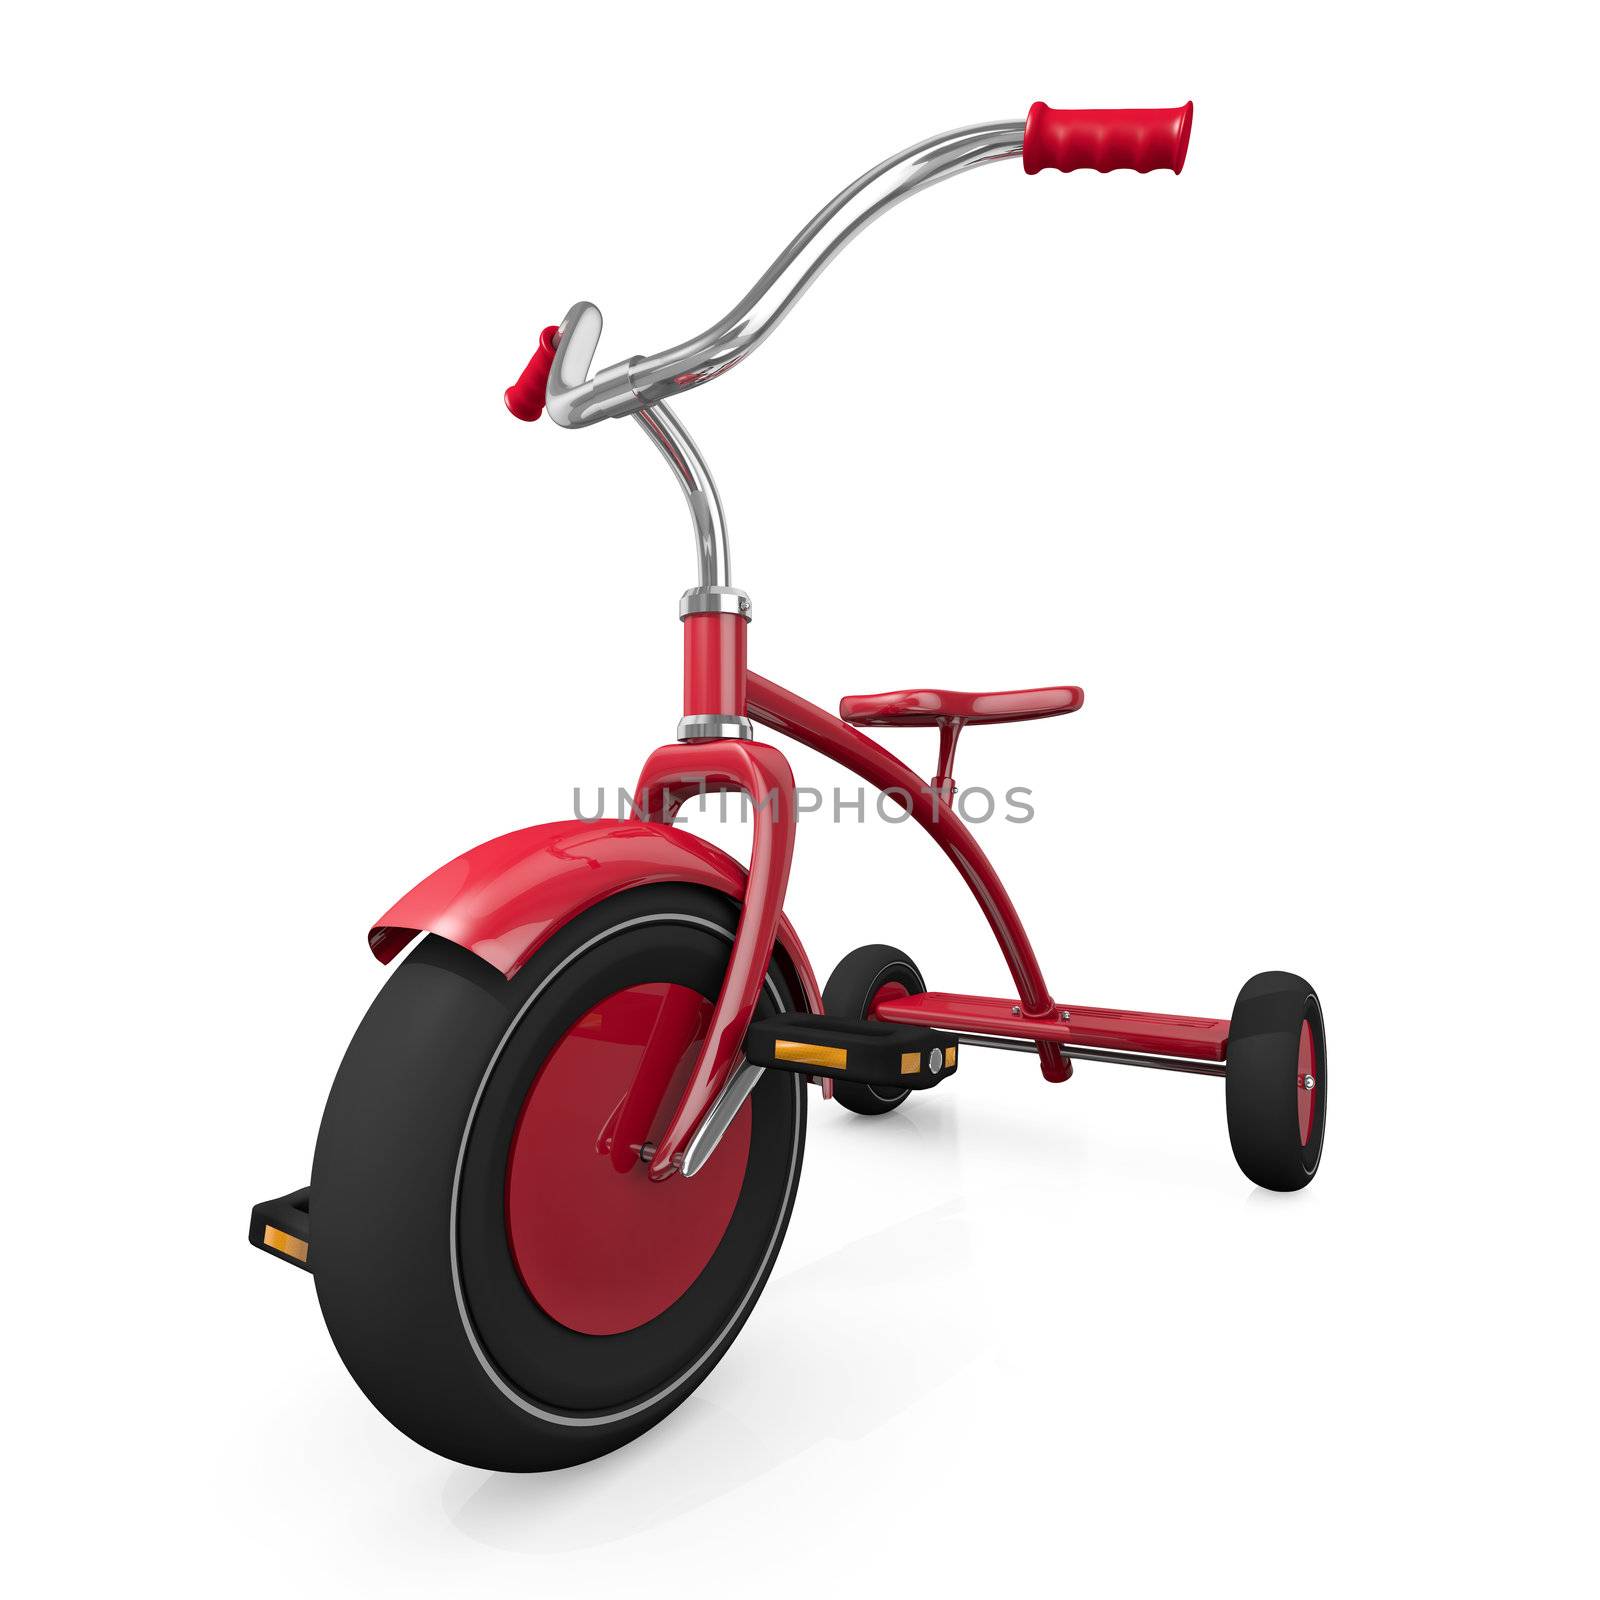 Red tricycle against a white background. High quality 3D rendered illustration.
